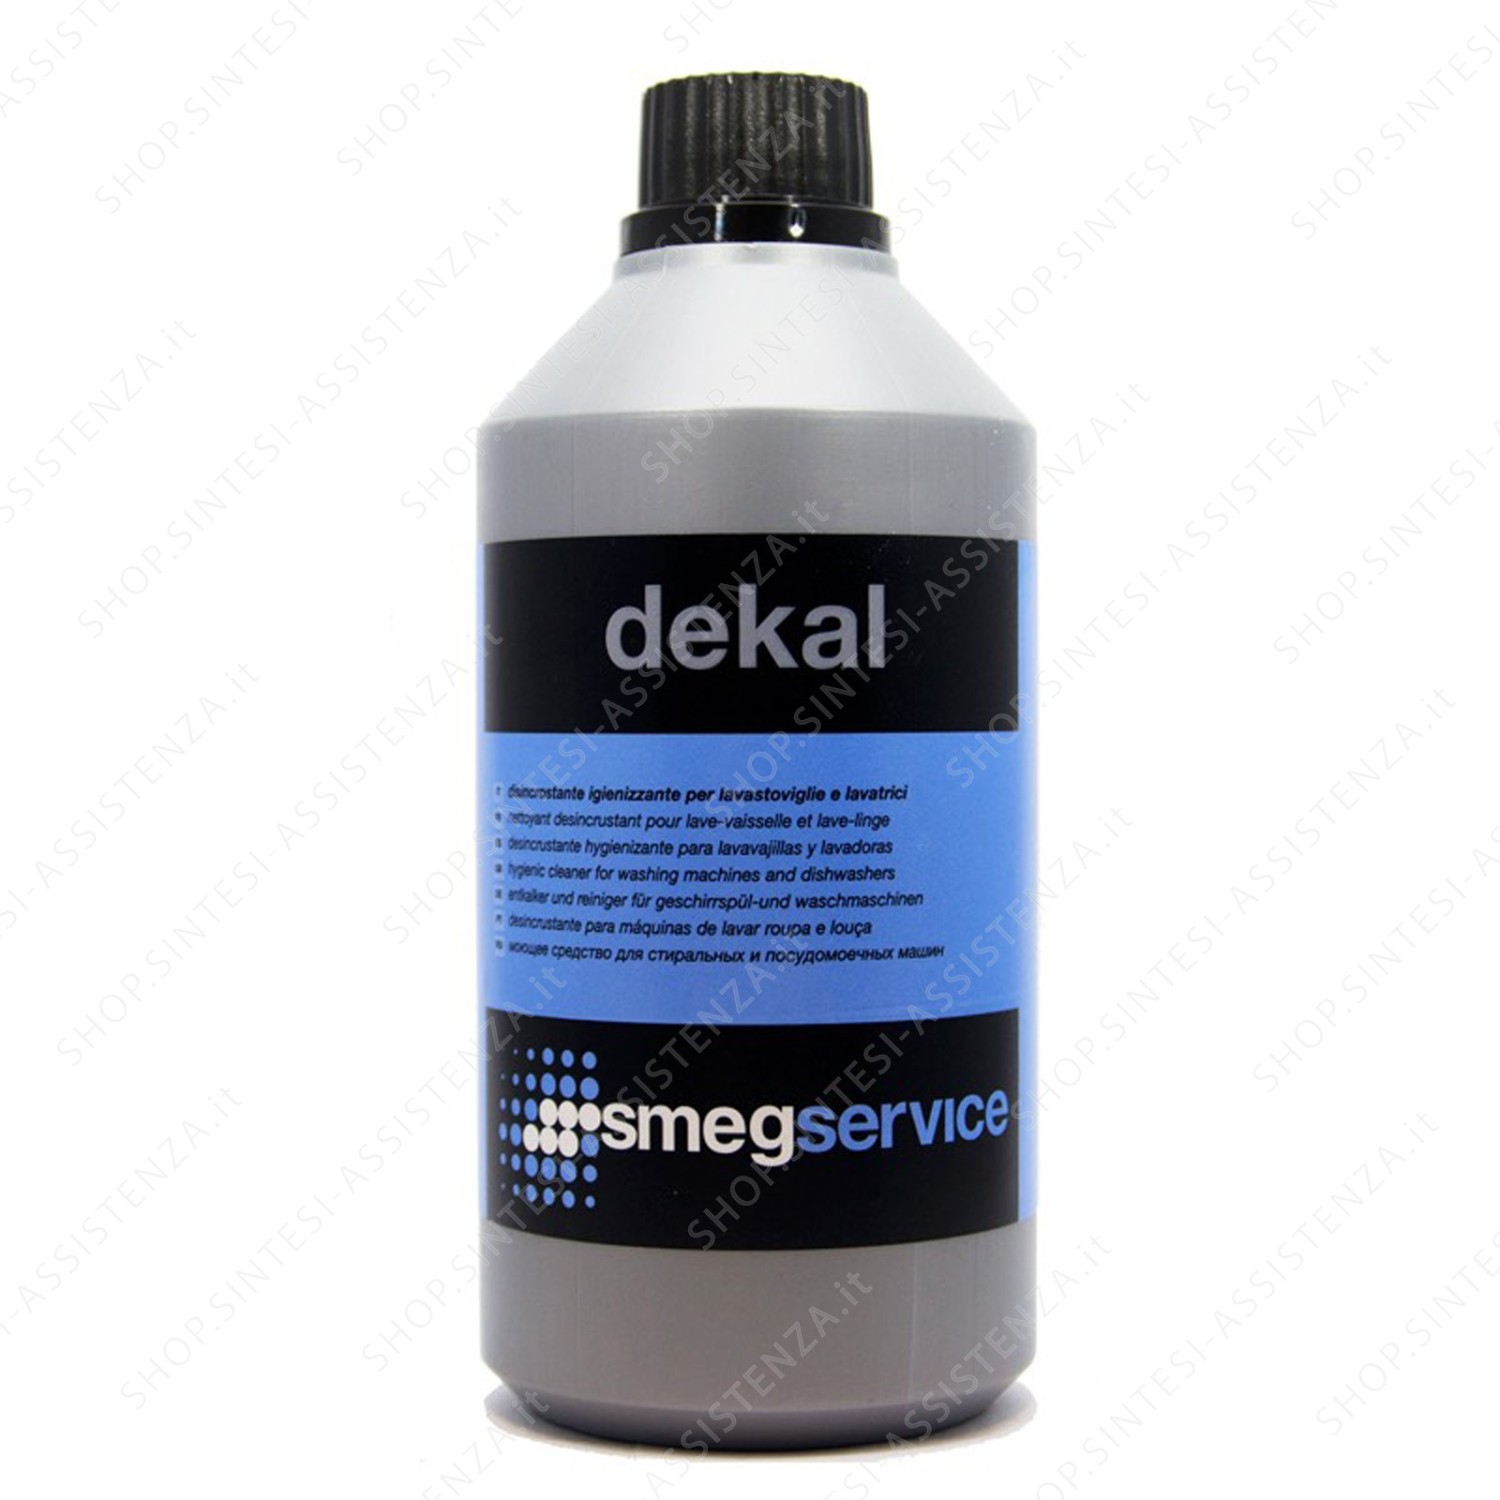 ANTI-SCALE DESCALER FOR CLEANING DISHWASHERS AND WASHING MACHINES - DEKAL